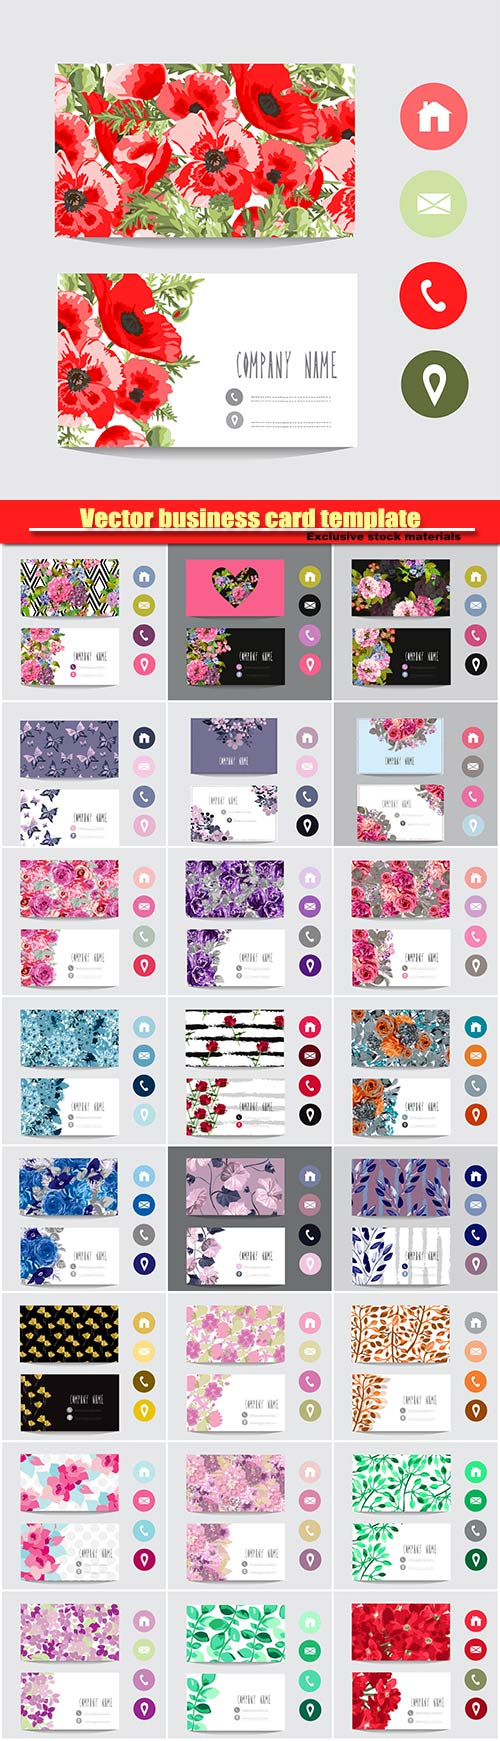 Vector business card template with flowers